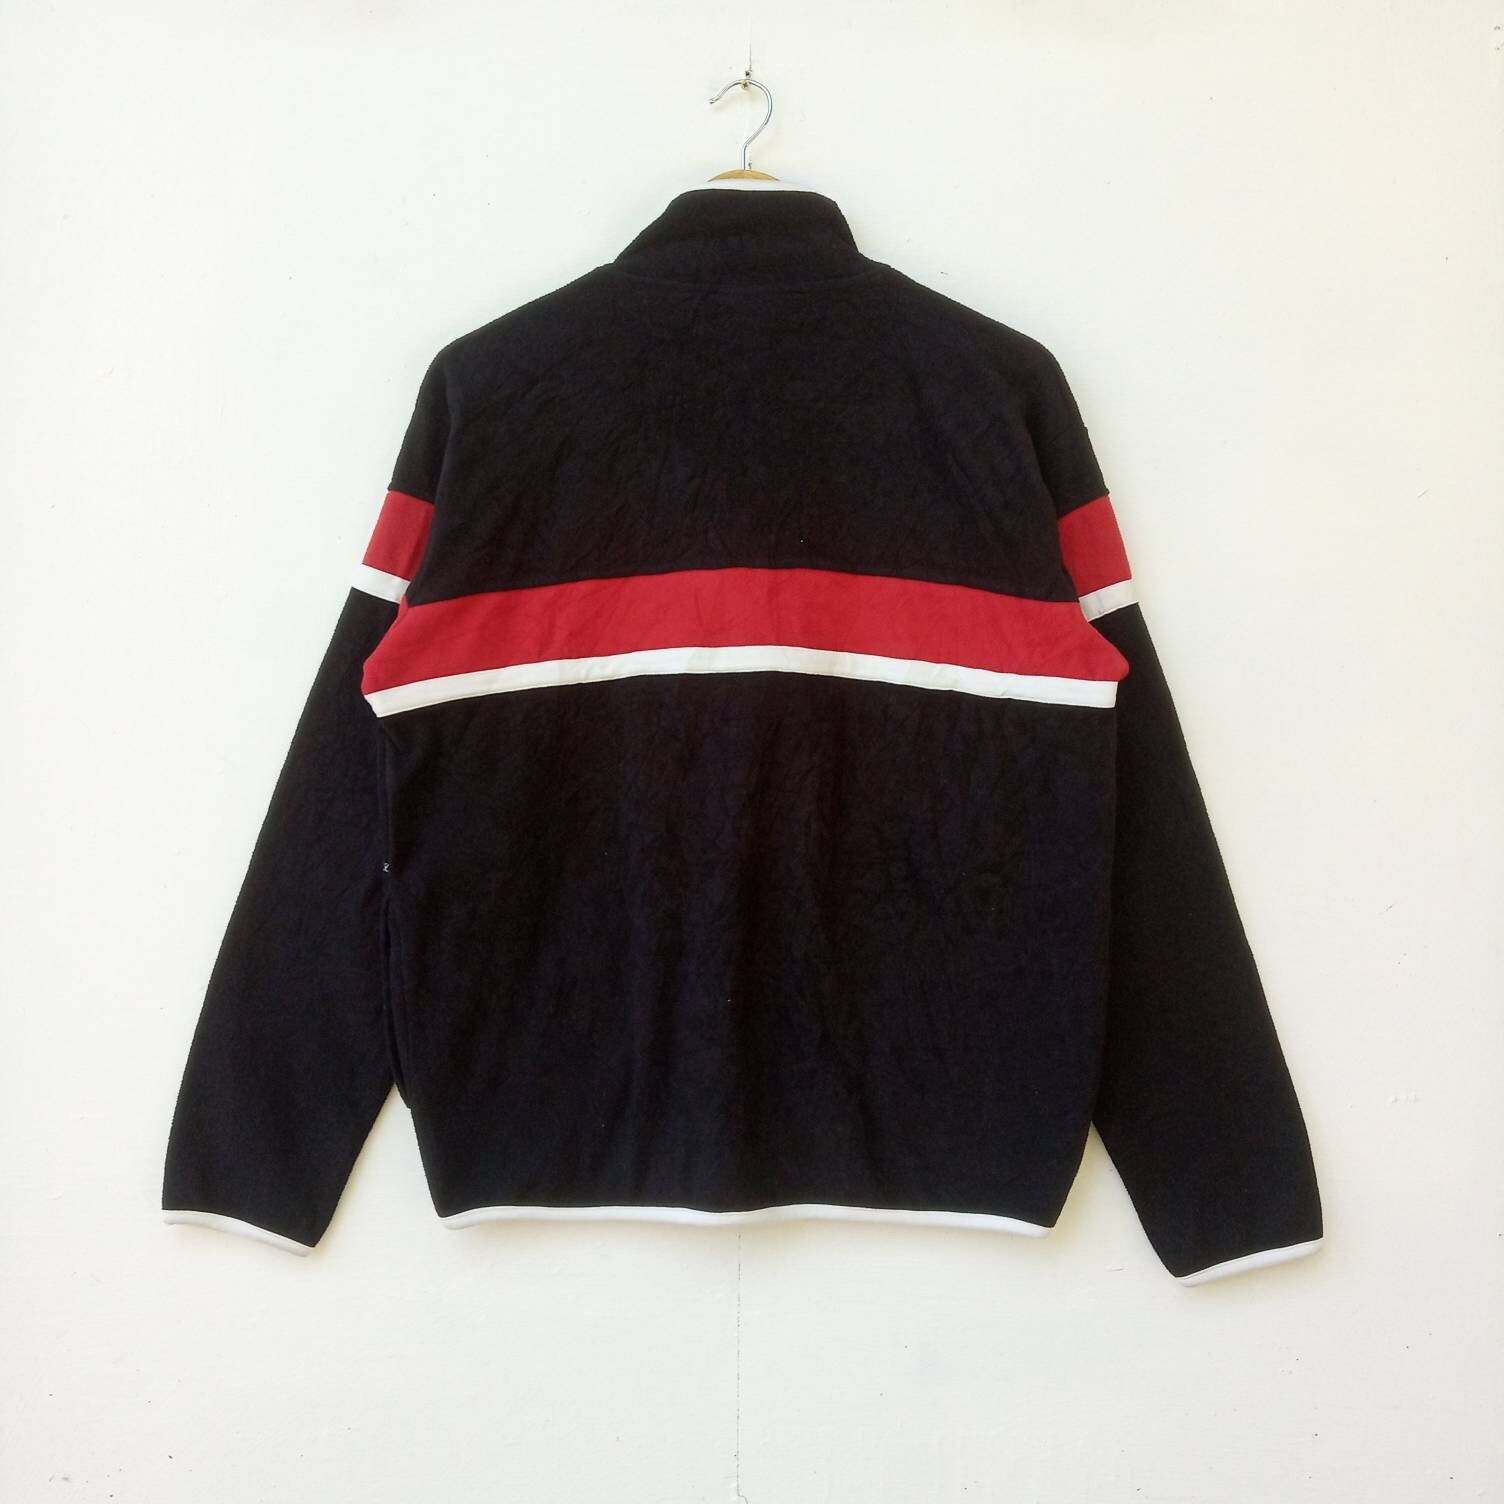 Nev Future Shapes Surfboards Surfer Colourblock Style Sweater - Etsy